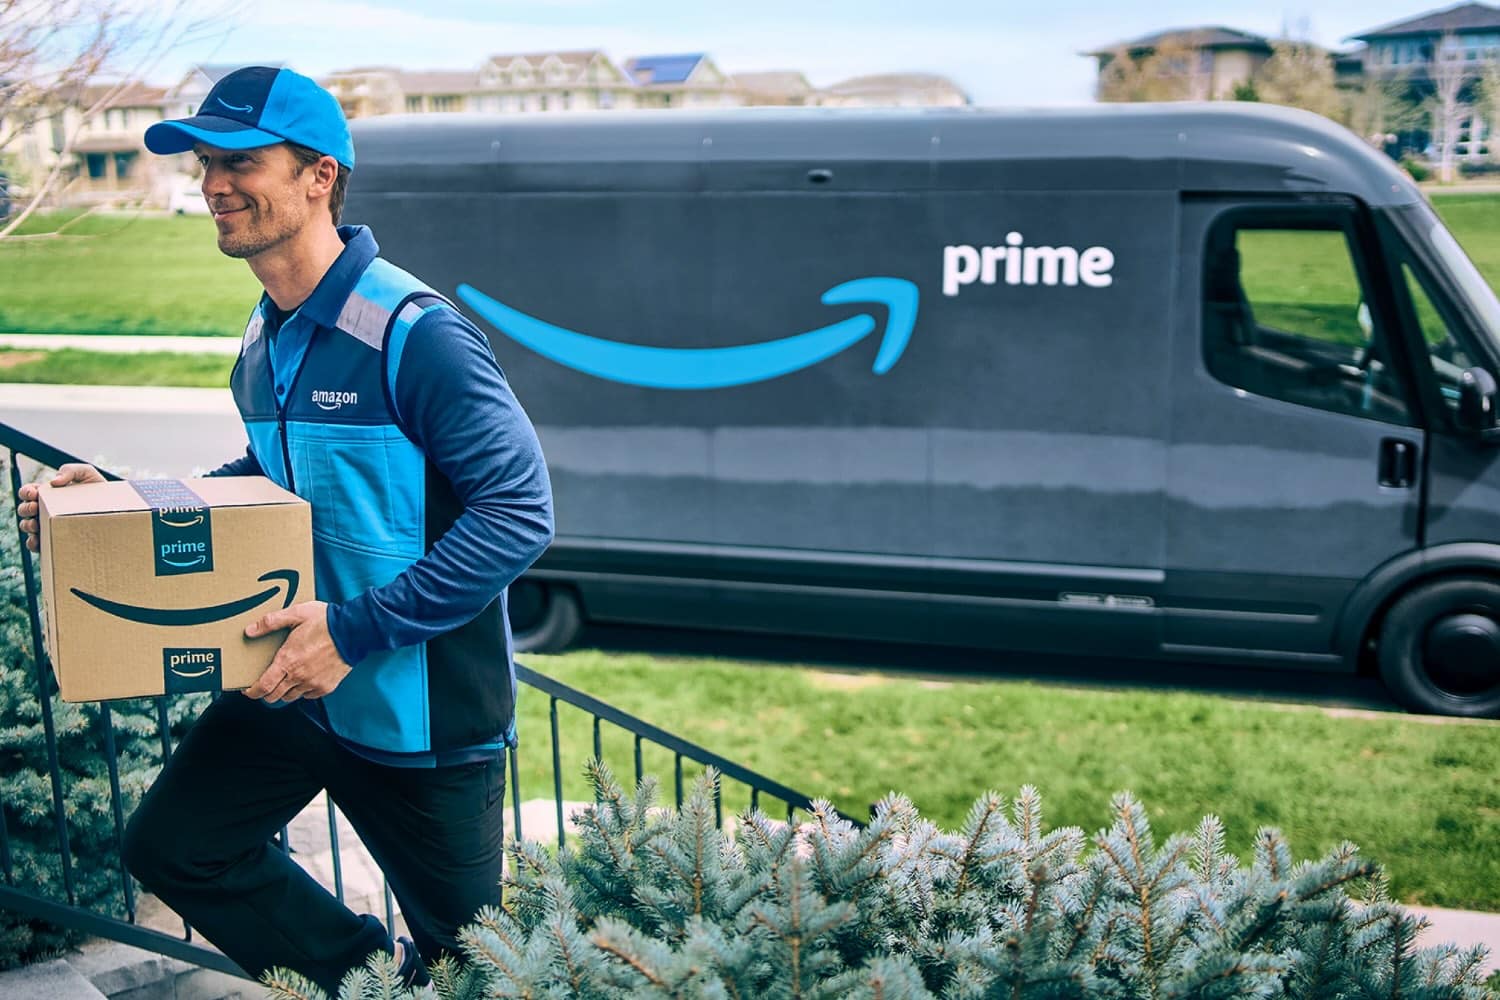 Amazon Prime delivery driver with package by van.